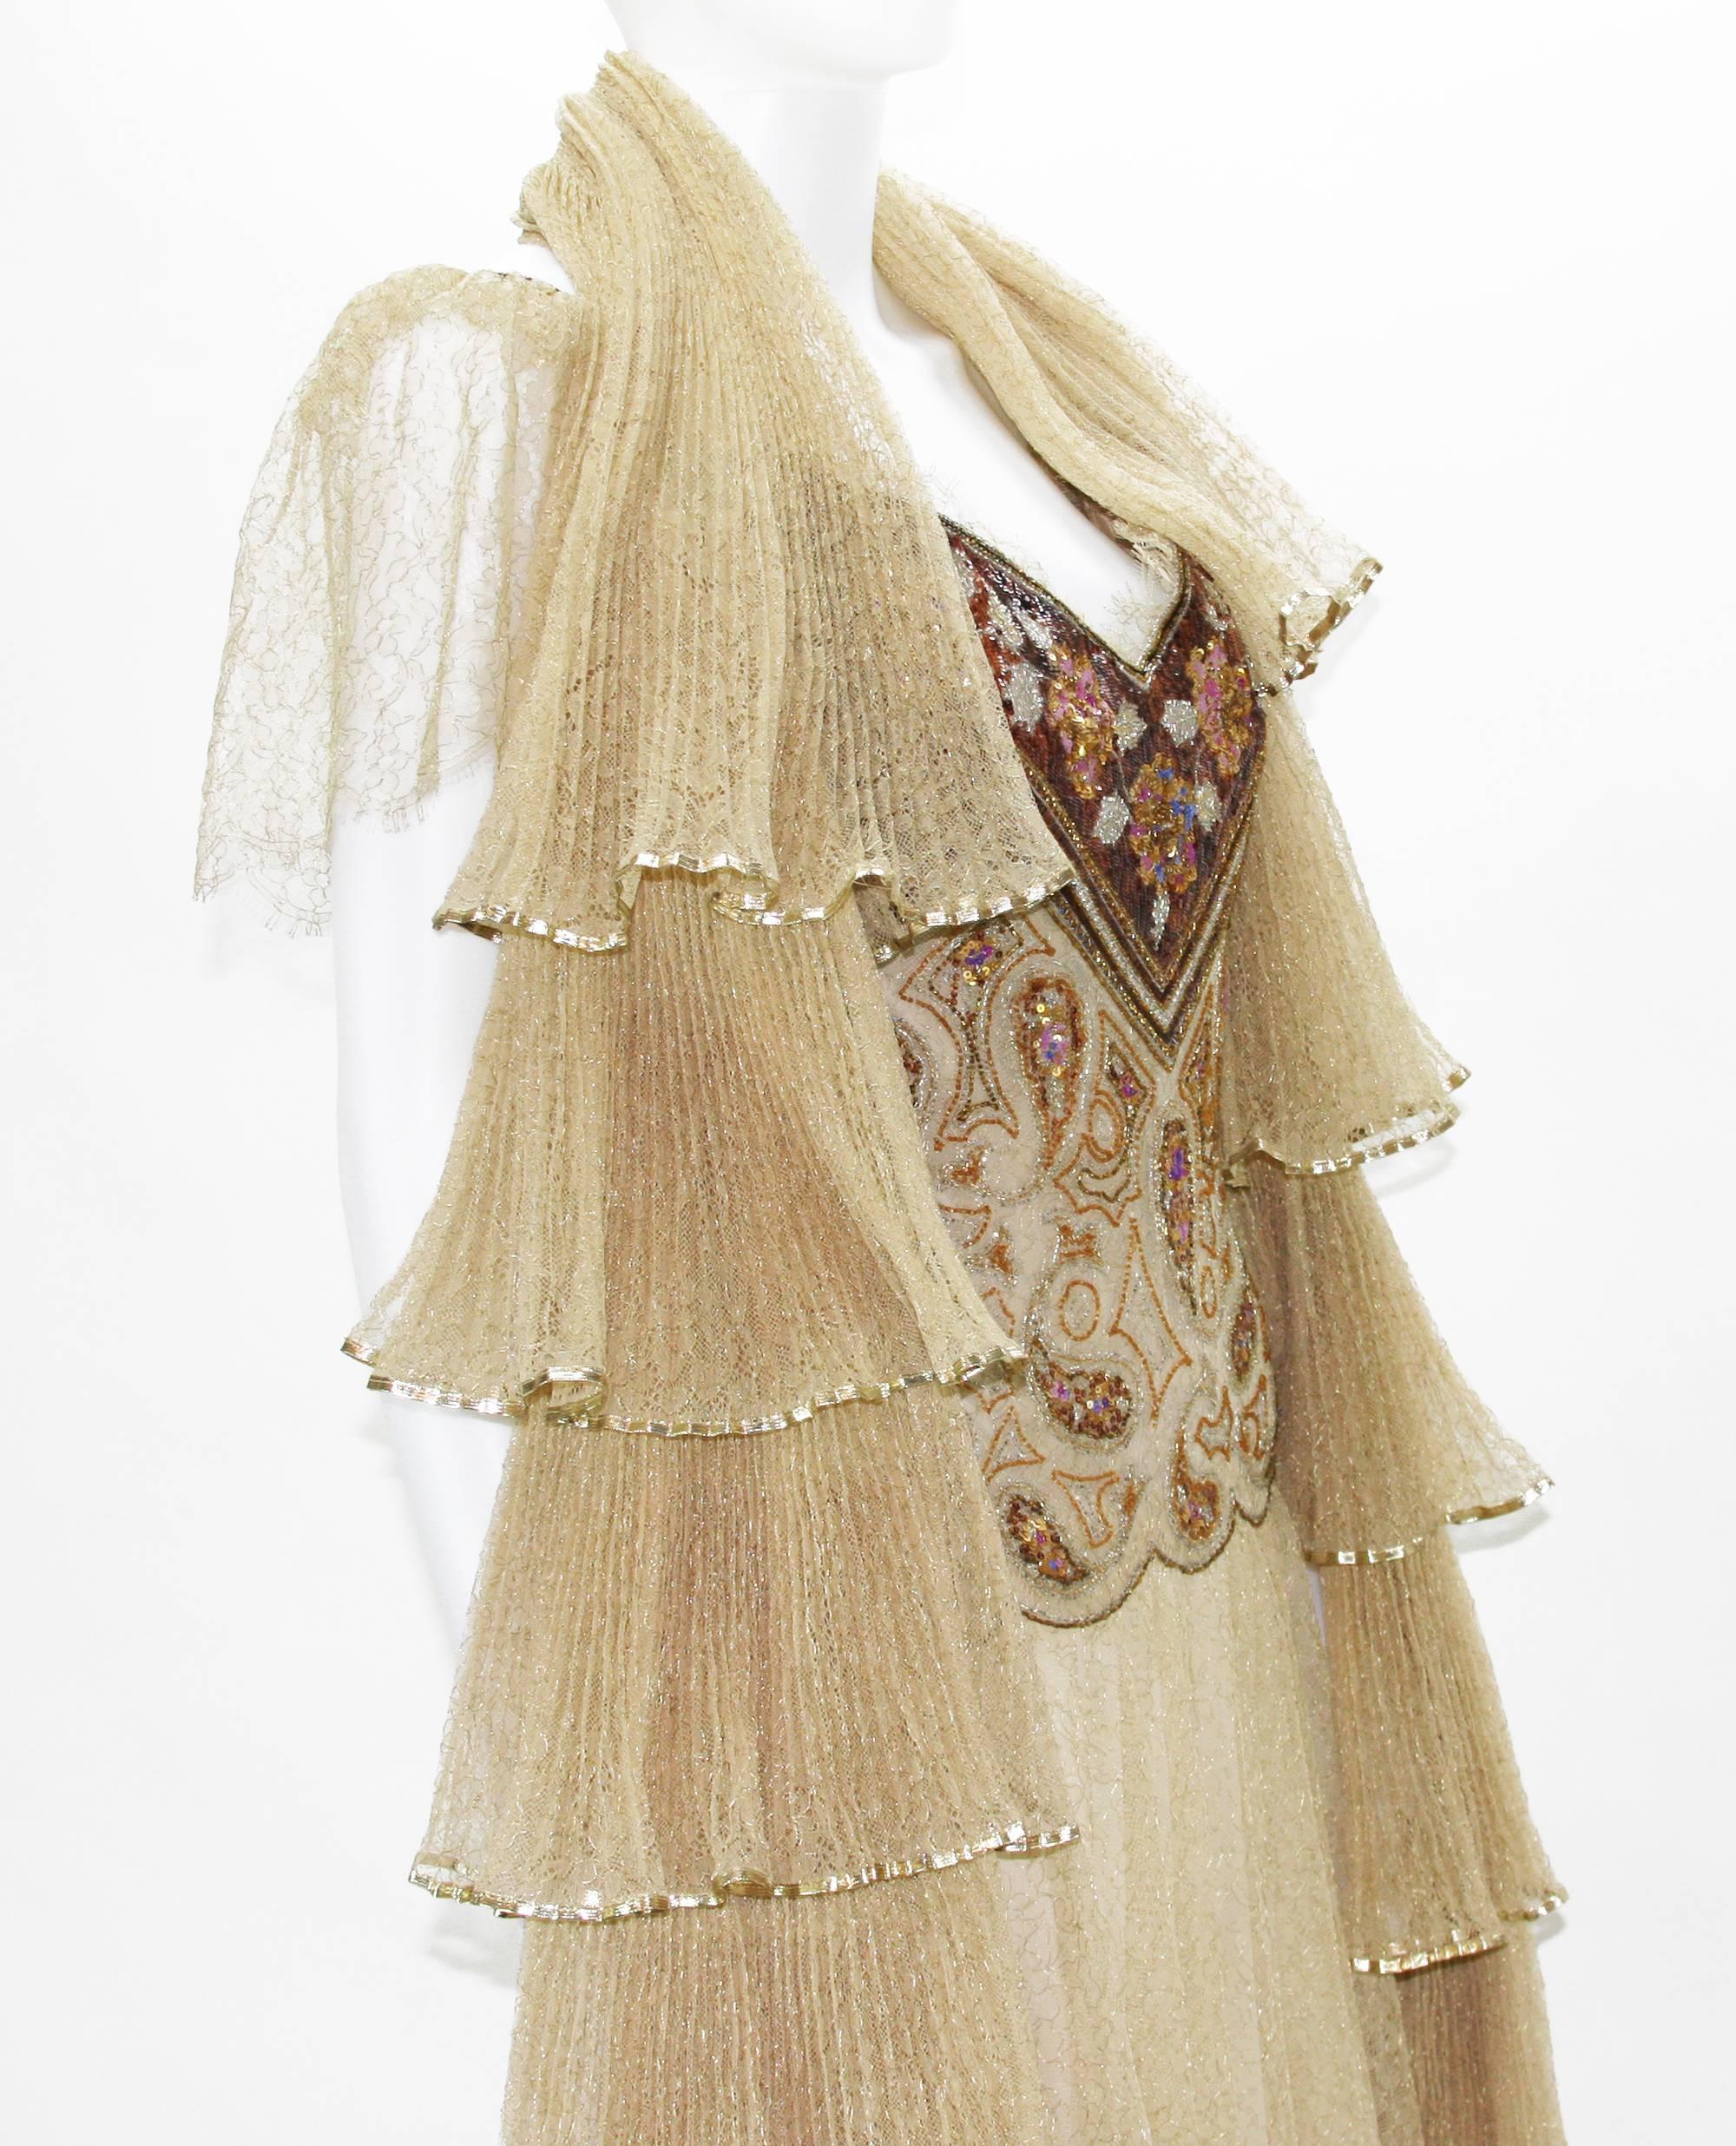 Automne-Hiver 1980 Christian Dior Paris Numbered Lace Gown with Stole 4